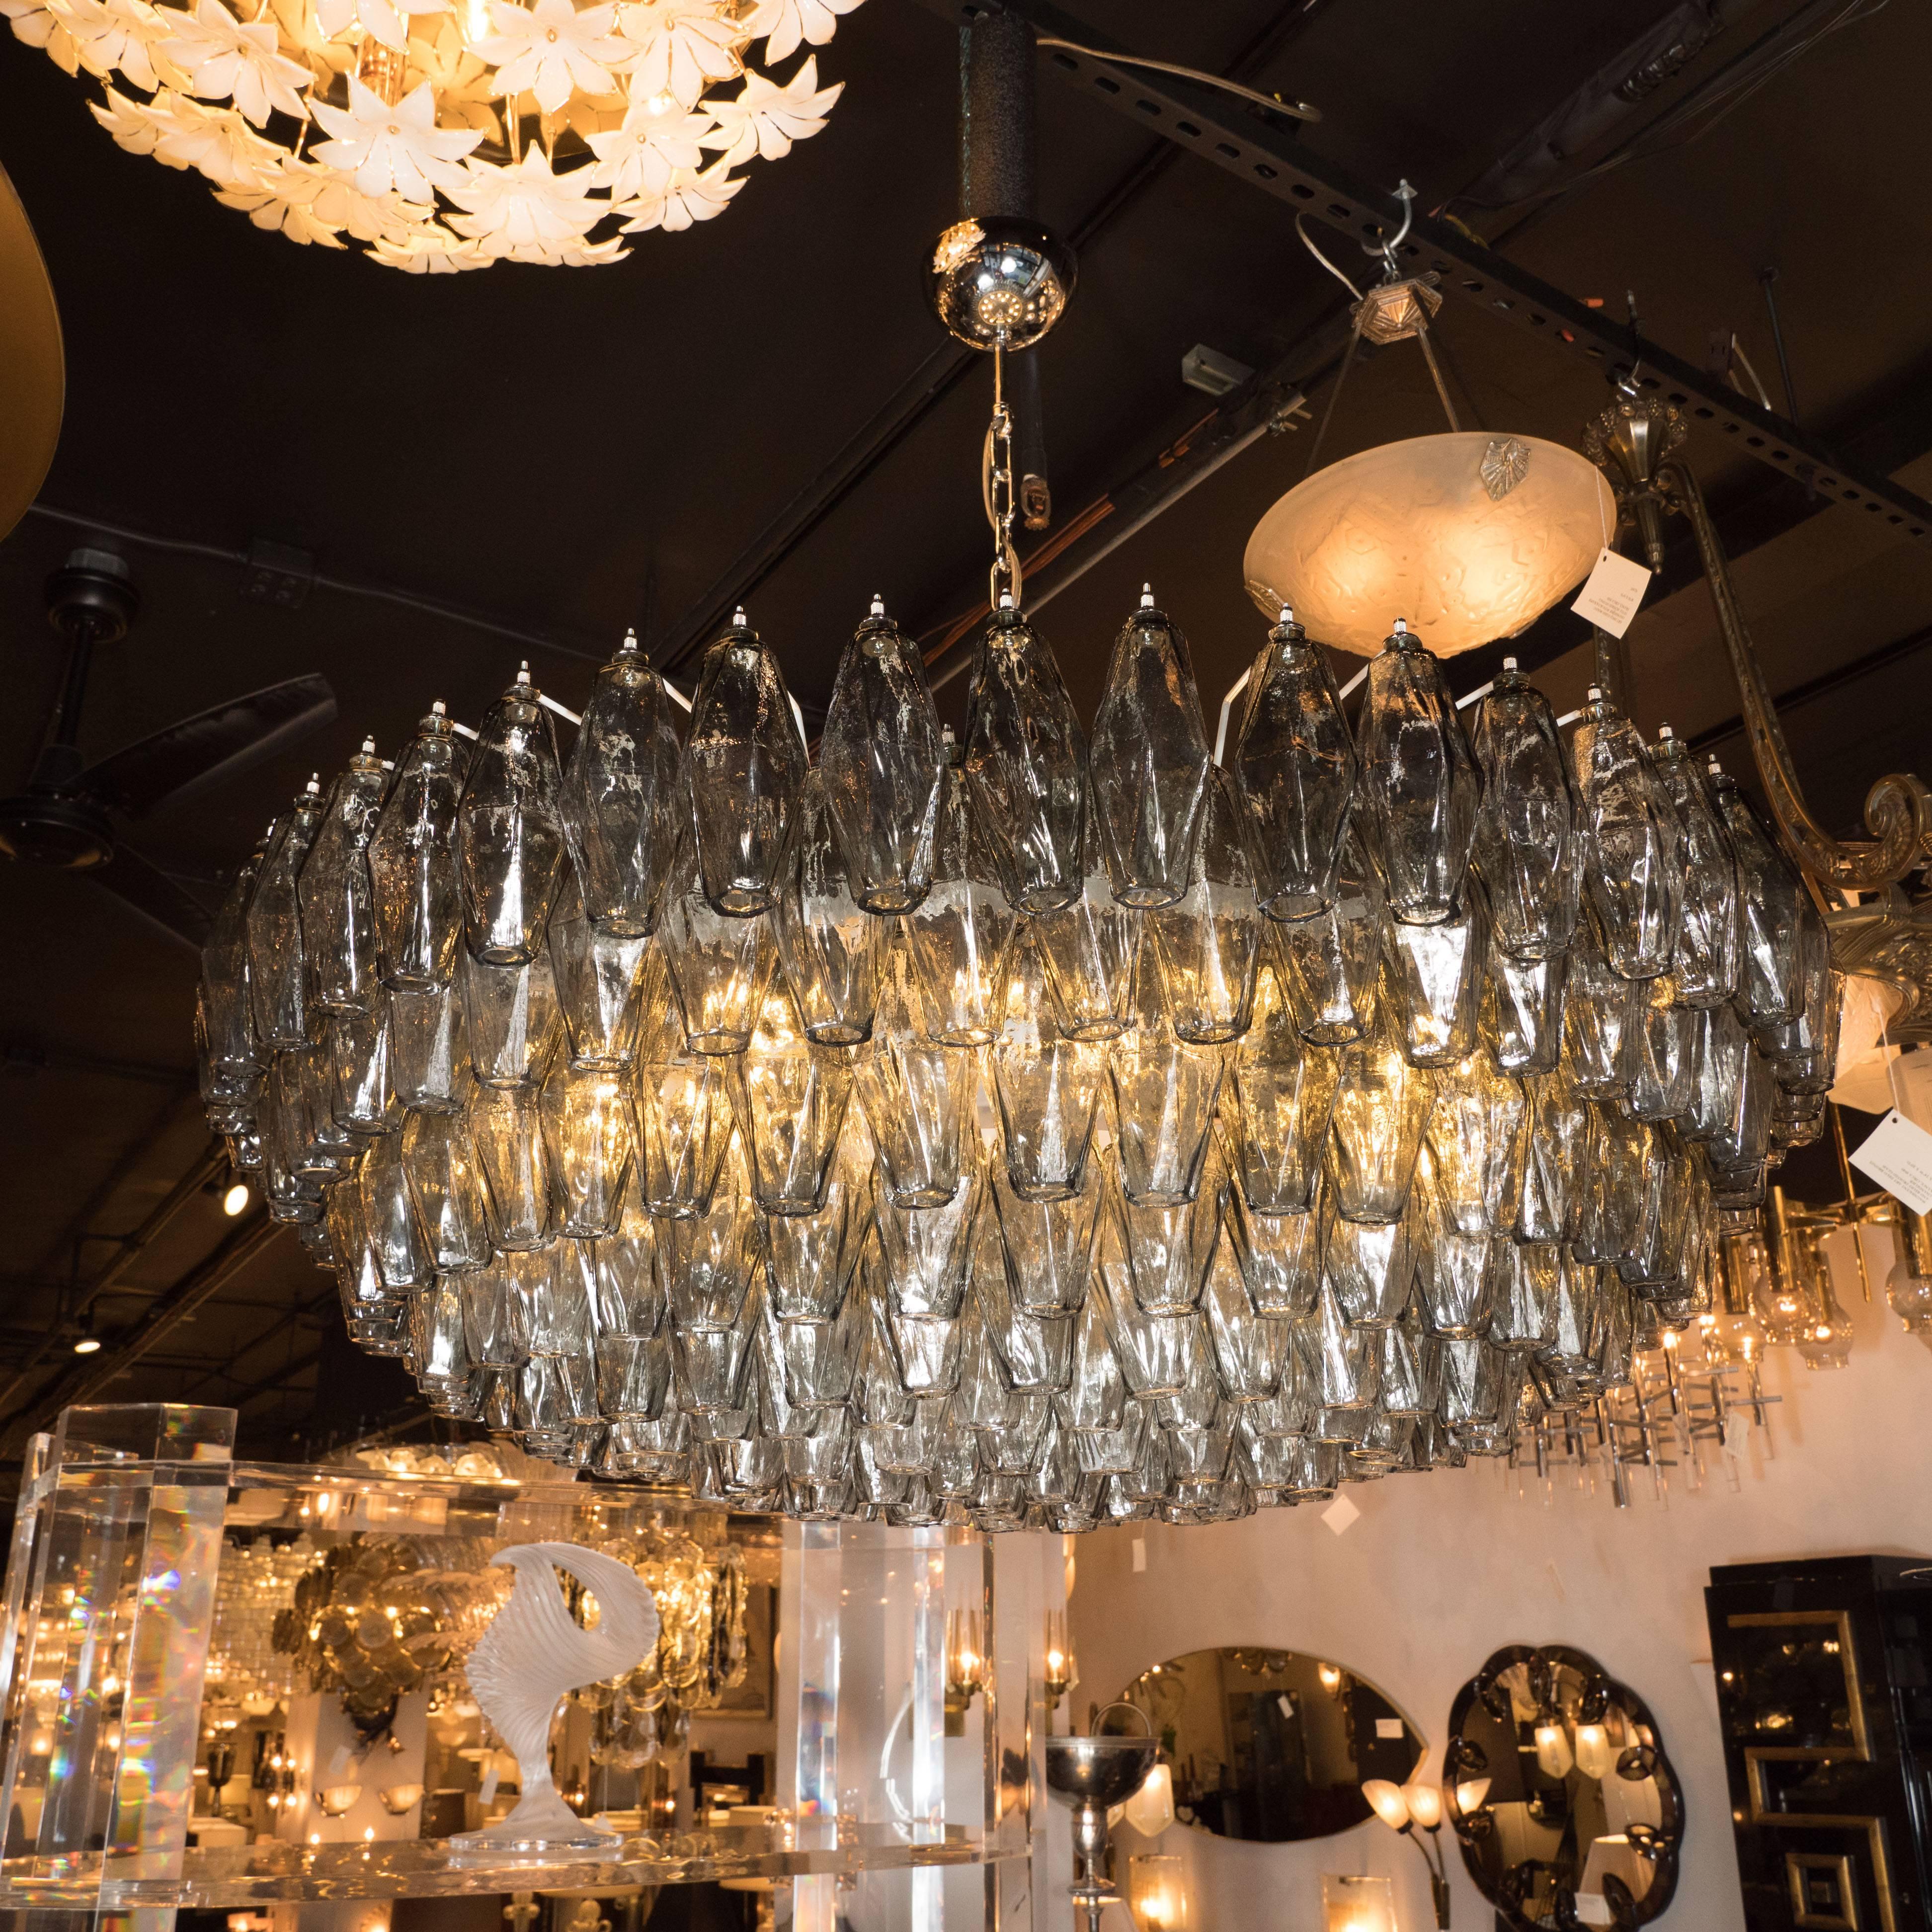 This impressive Murano glass chandelier, in the manner of Venini, features a constellation of handblown Murano glass polyhedral glass shades in a smoked pewter grey hue. Each shade has been hand blown and individually hung from its frame.